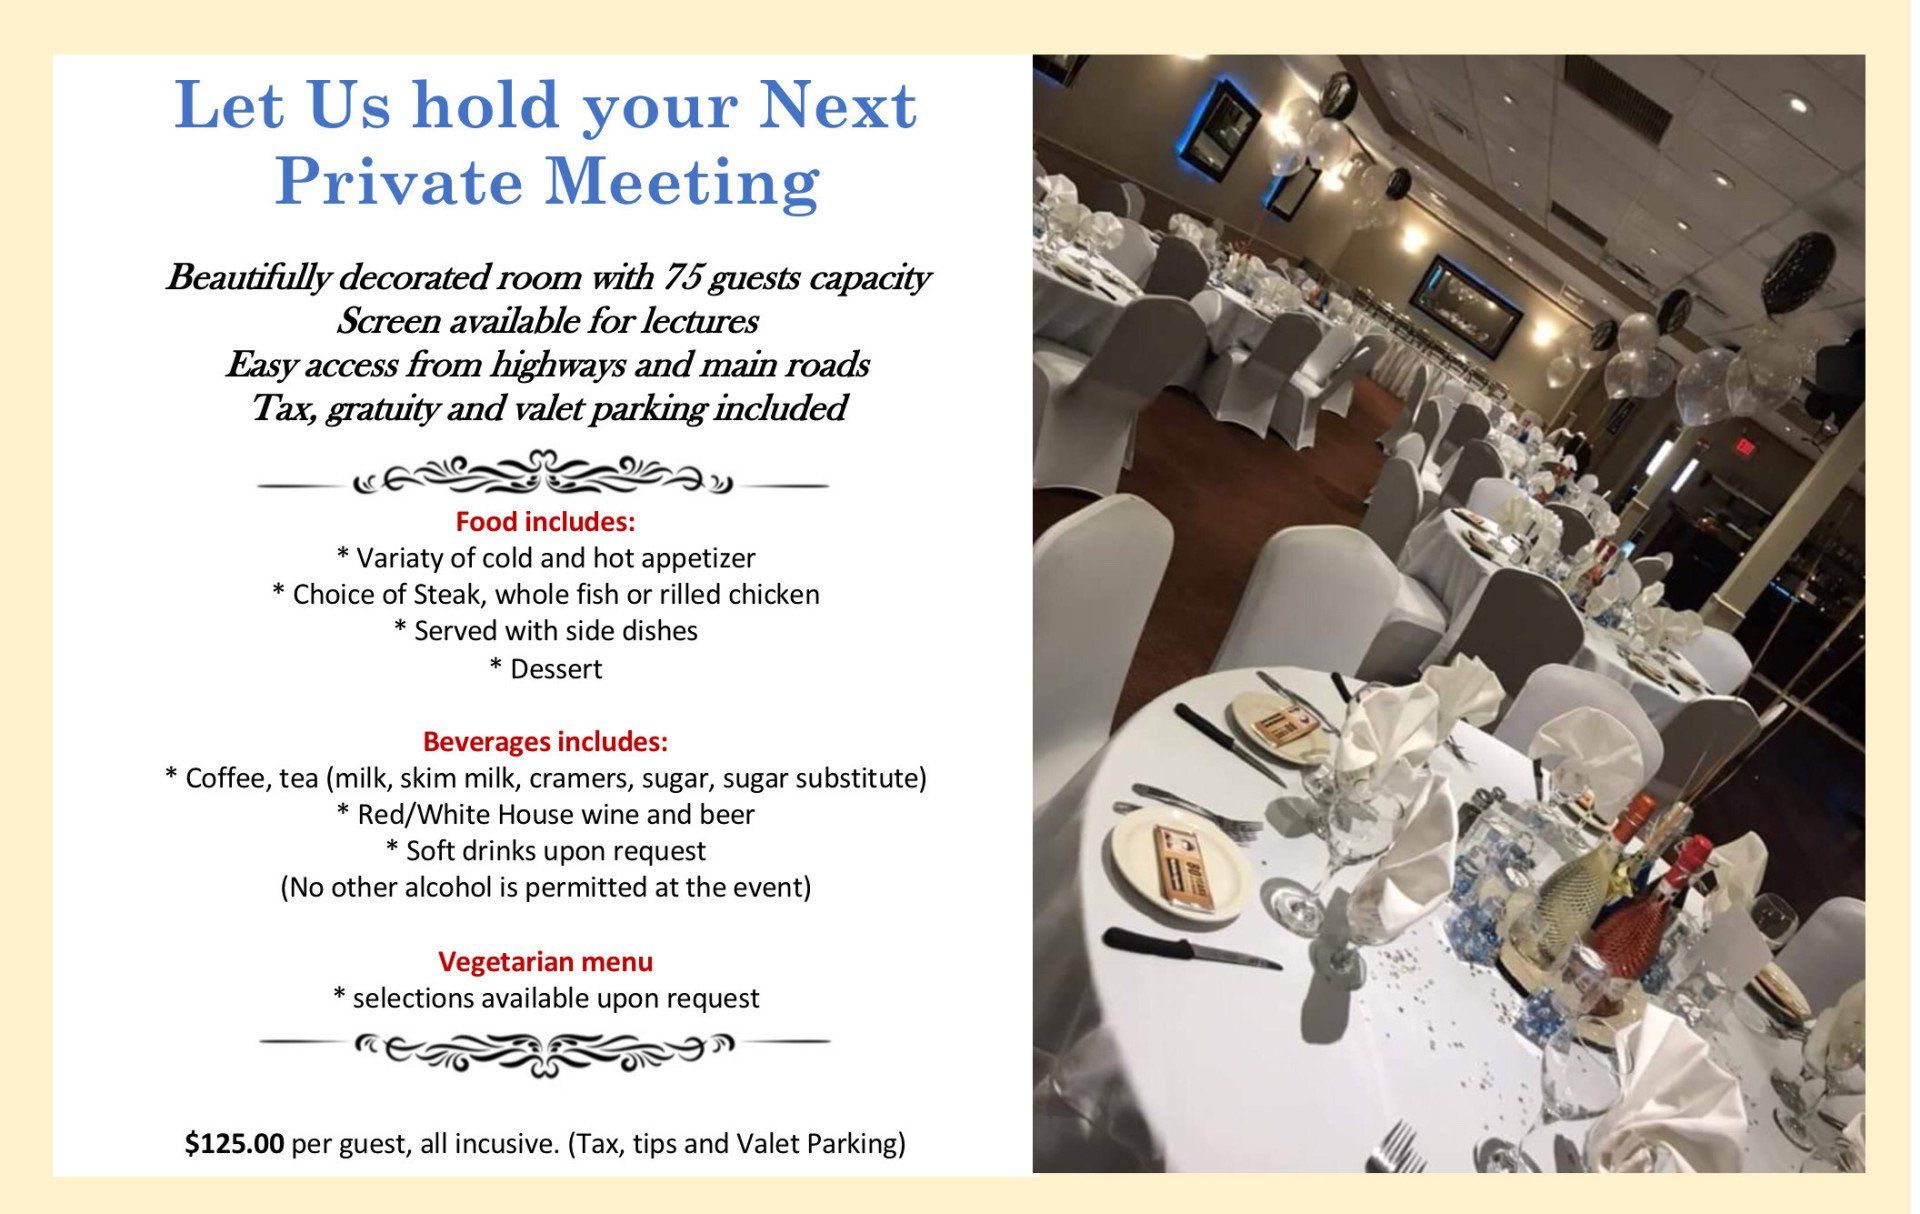 Let us hold your next private meeting